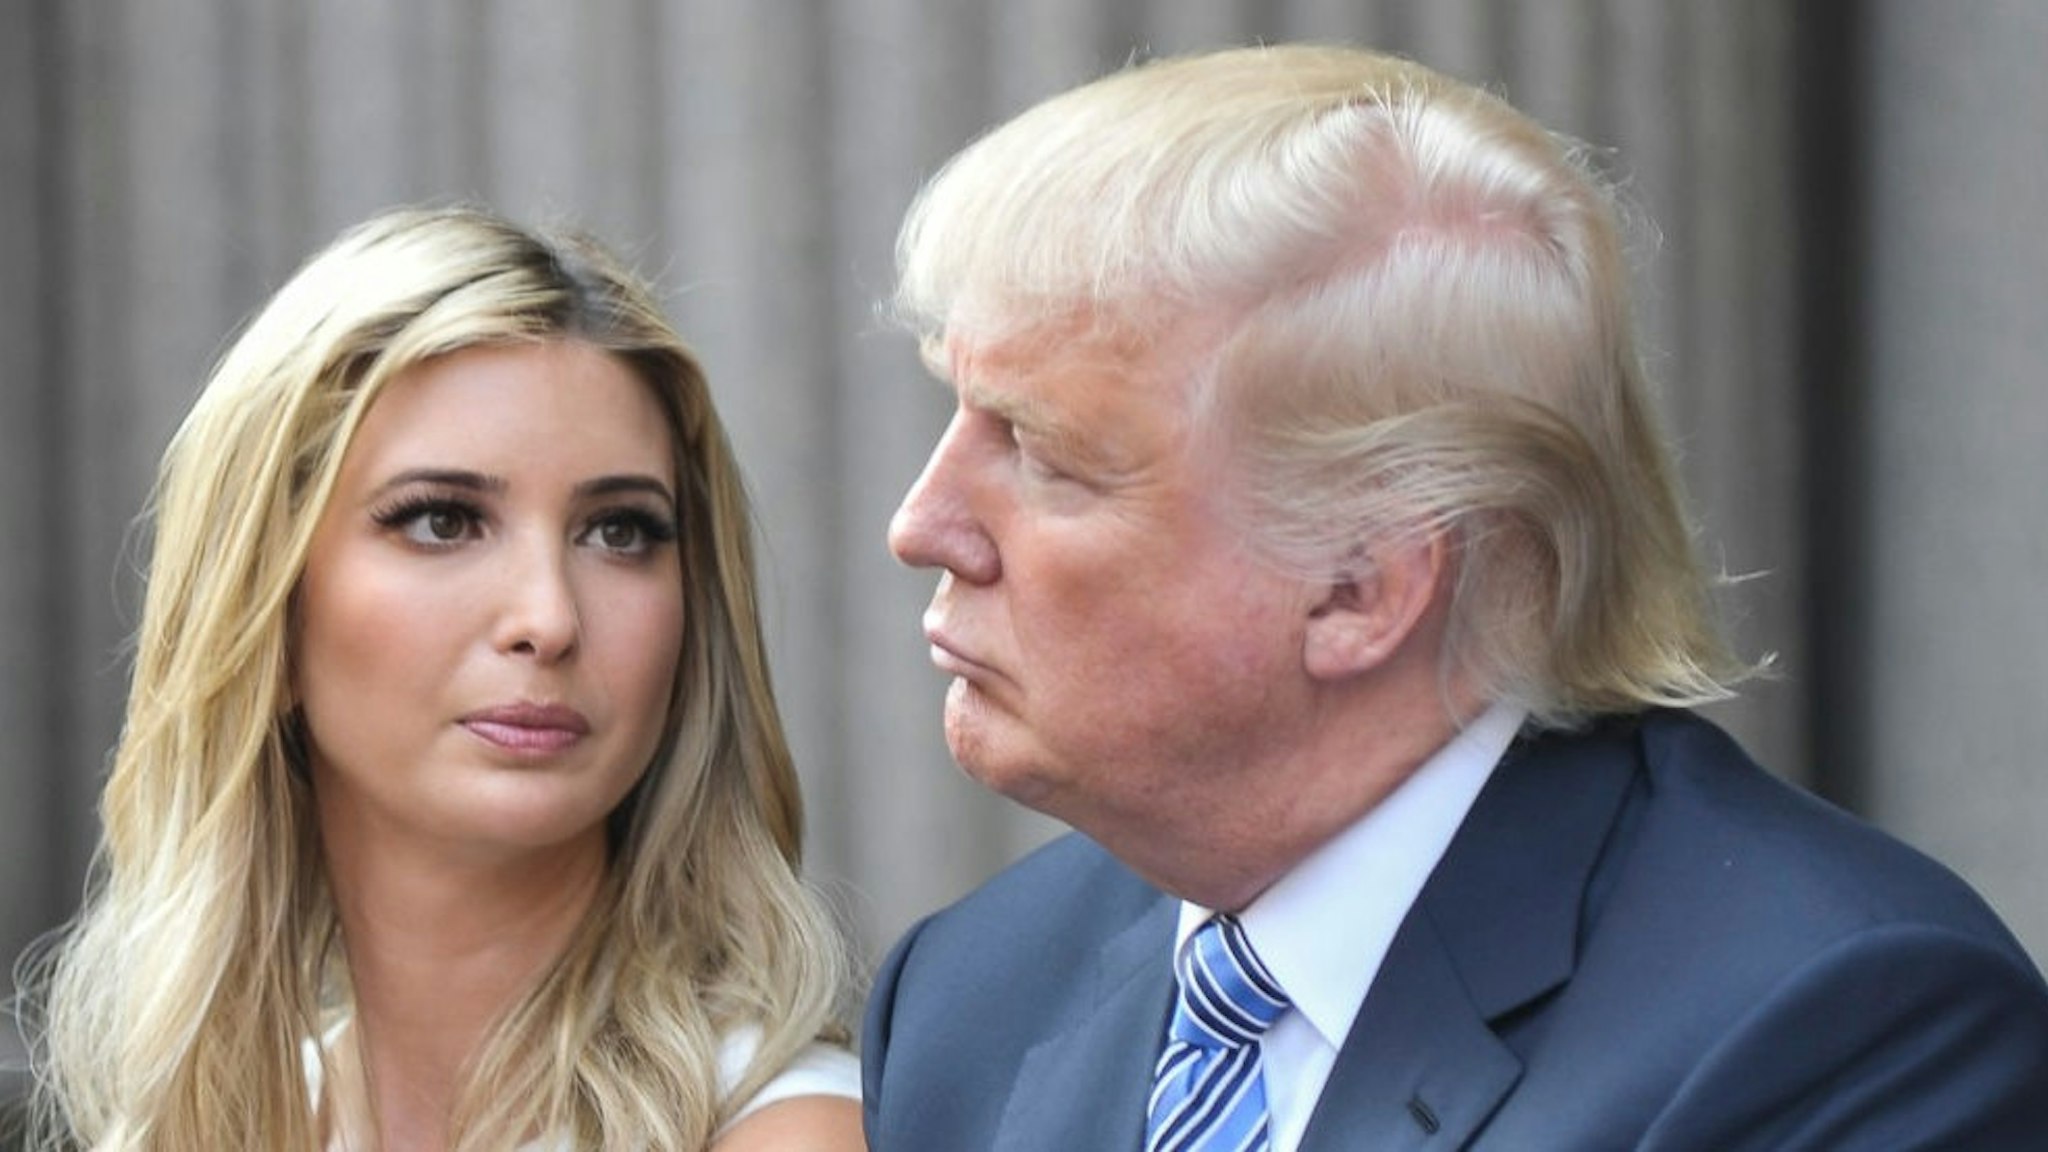 WASHINGTON, DC - JULY 23: Ivanka Trump and Donald Trump attend the Trump International Hotel Washington, D.C Groundbreaking Ceremony at Old Post Office on July 23, 2014 in Washington, DC. (Photo by